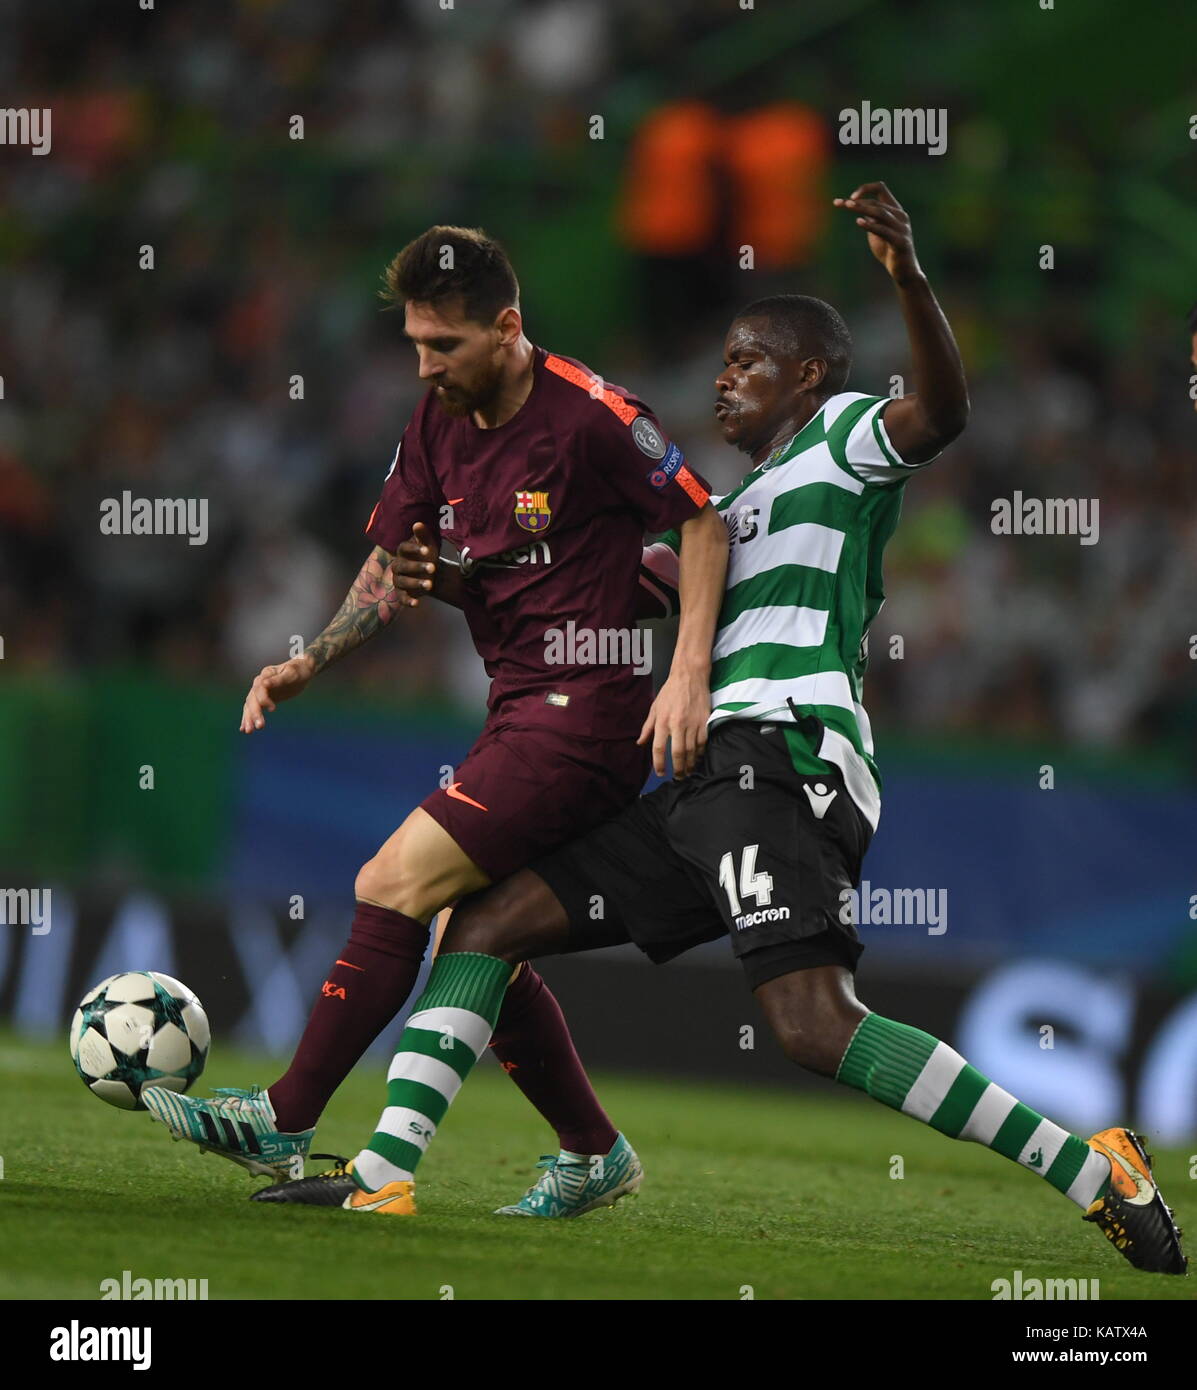 Lisbon, Portugal. 27th Sep, 2017. Barcelona's Lionel Messi (L) vies with Sporting's William Carvalho during the UEFA Champions League group D match between Sporting CP and FC Barcelona in Lisbon, Portugal, on Sept. 27, 2017. Barcelona won 1-0. Credit: Zhang Liyun/Xinhua/Alamy Live News Stock Photo